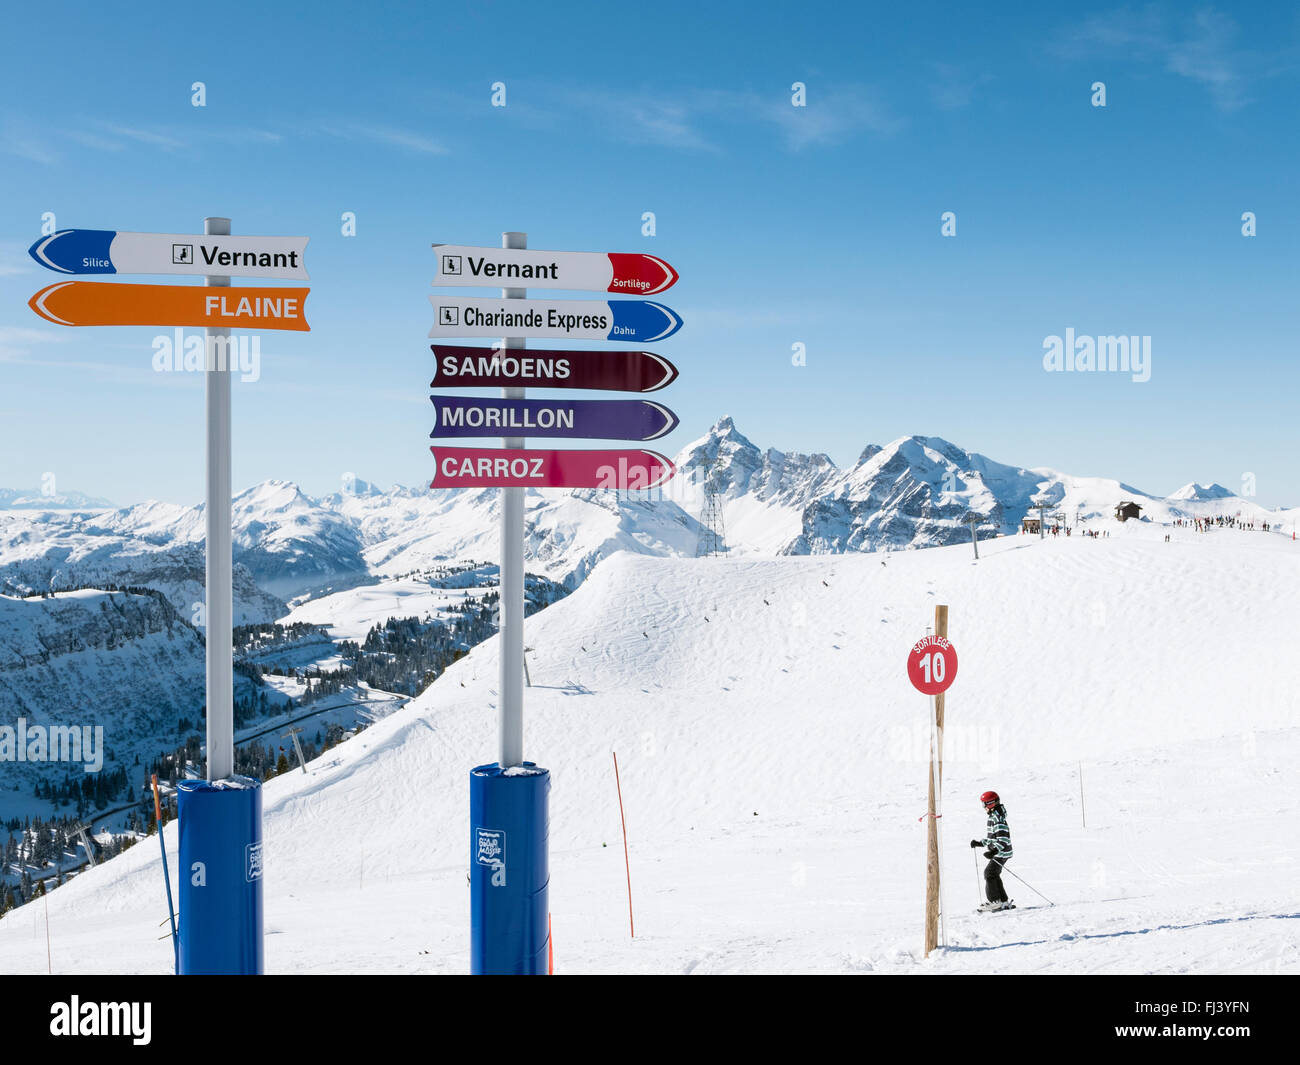 Piste signpost at Tete des Sais in Le Grand Massif ski area in French Alps above Flaine and Samoens, Rhone-Alpes, France Stock Photo